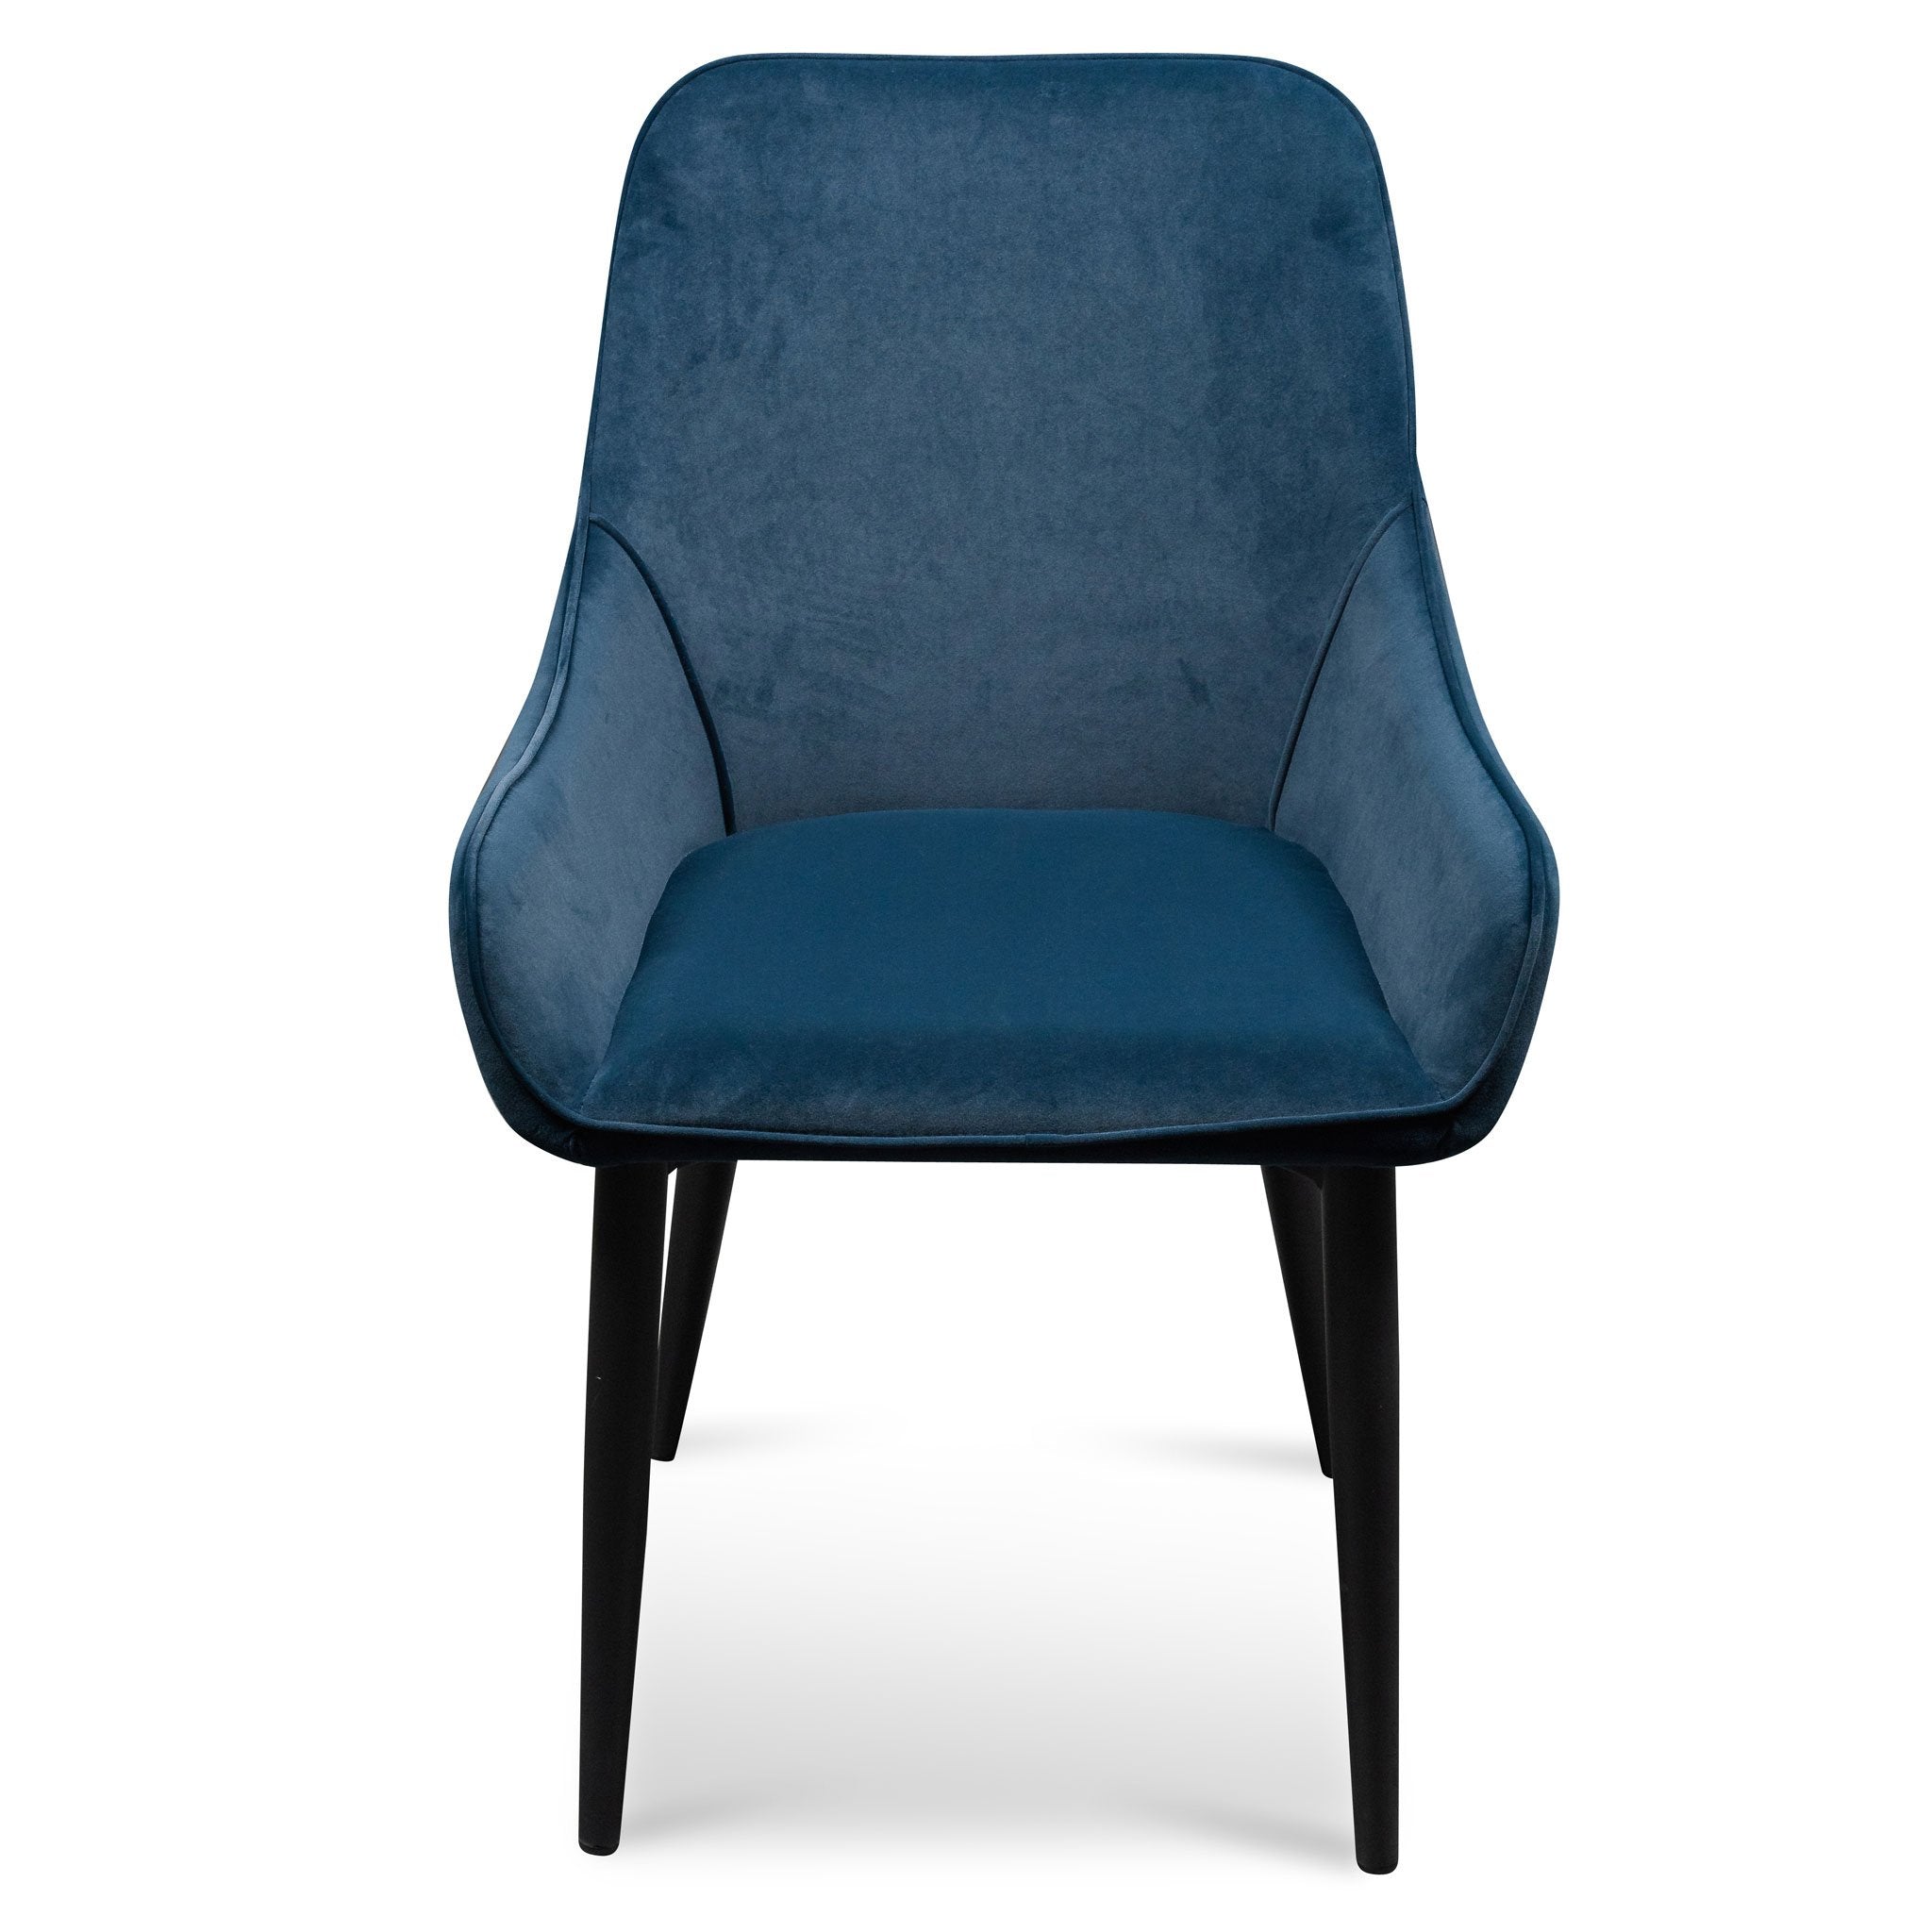 Set of 2 Lina Dining Chair - Navy Blue Velvet - Dining Chairs